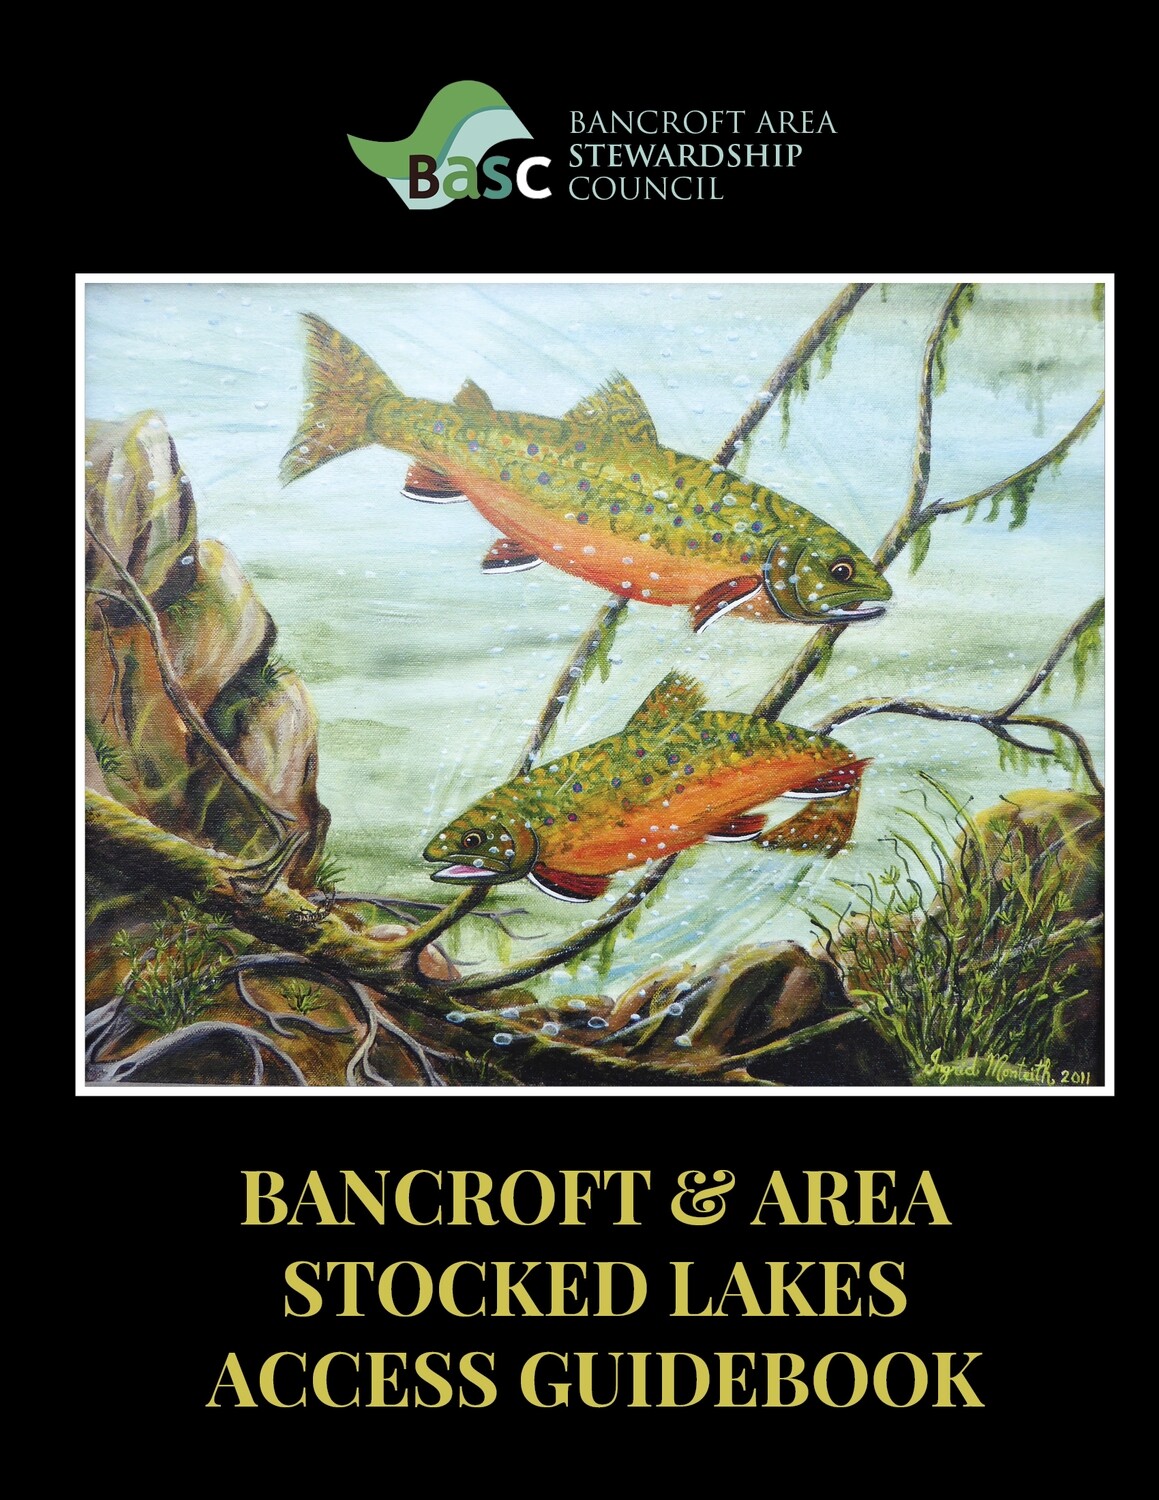 Bancroft & Area Stocked Lakes Access Guidebook